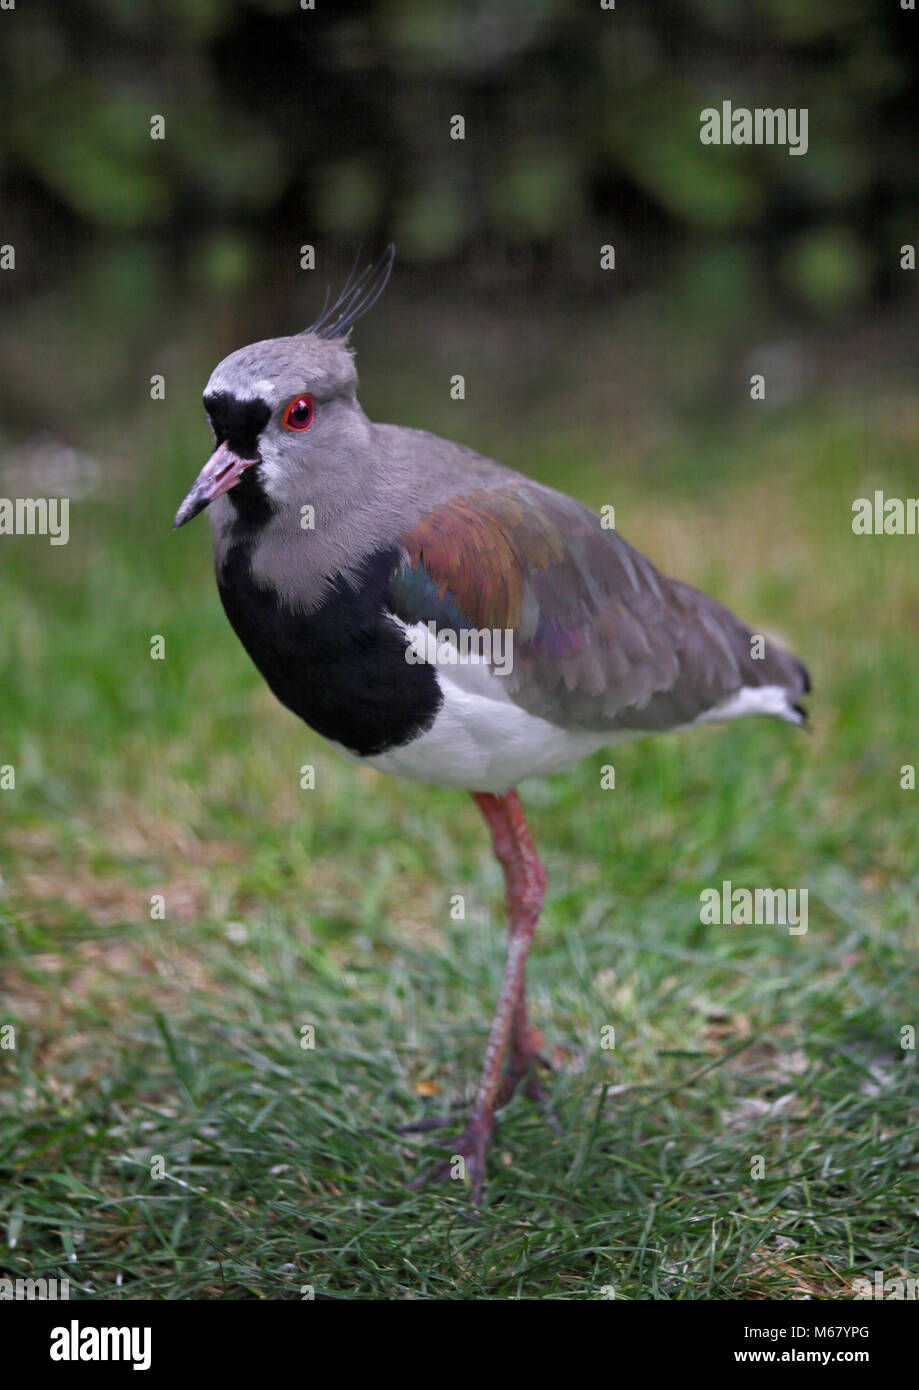 Southern Lapwing (vanellus chilensis) Stock Photo